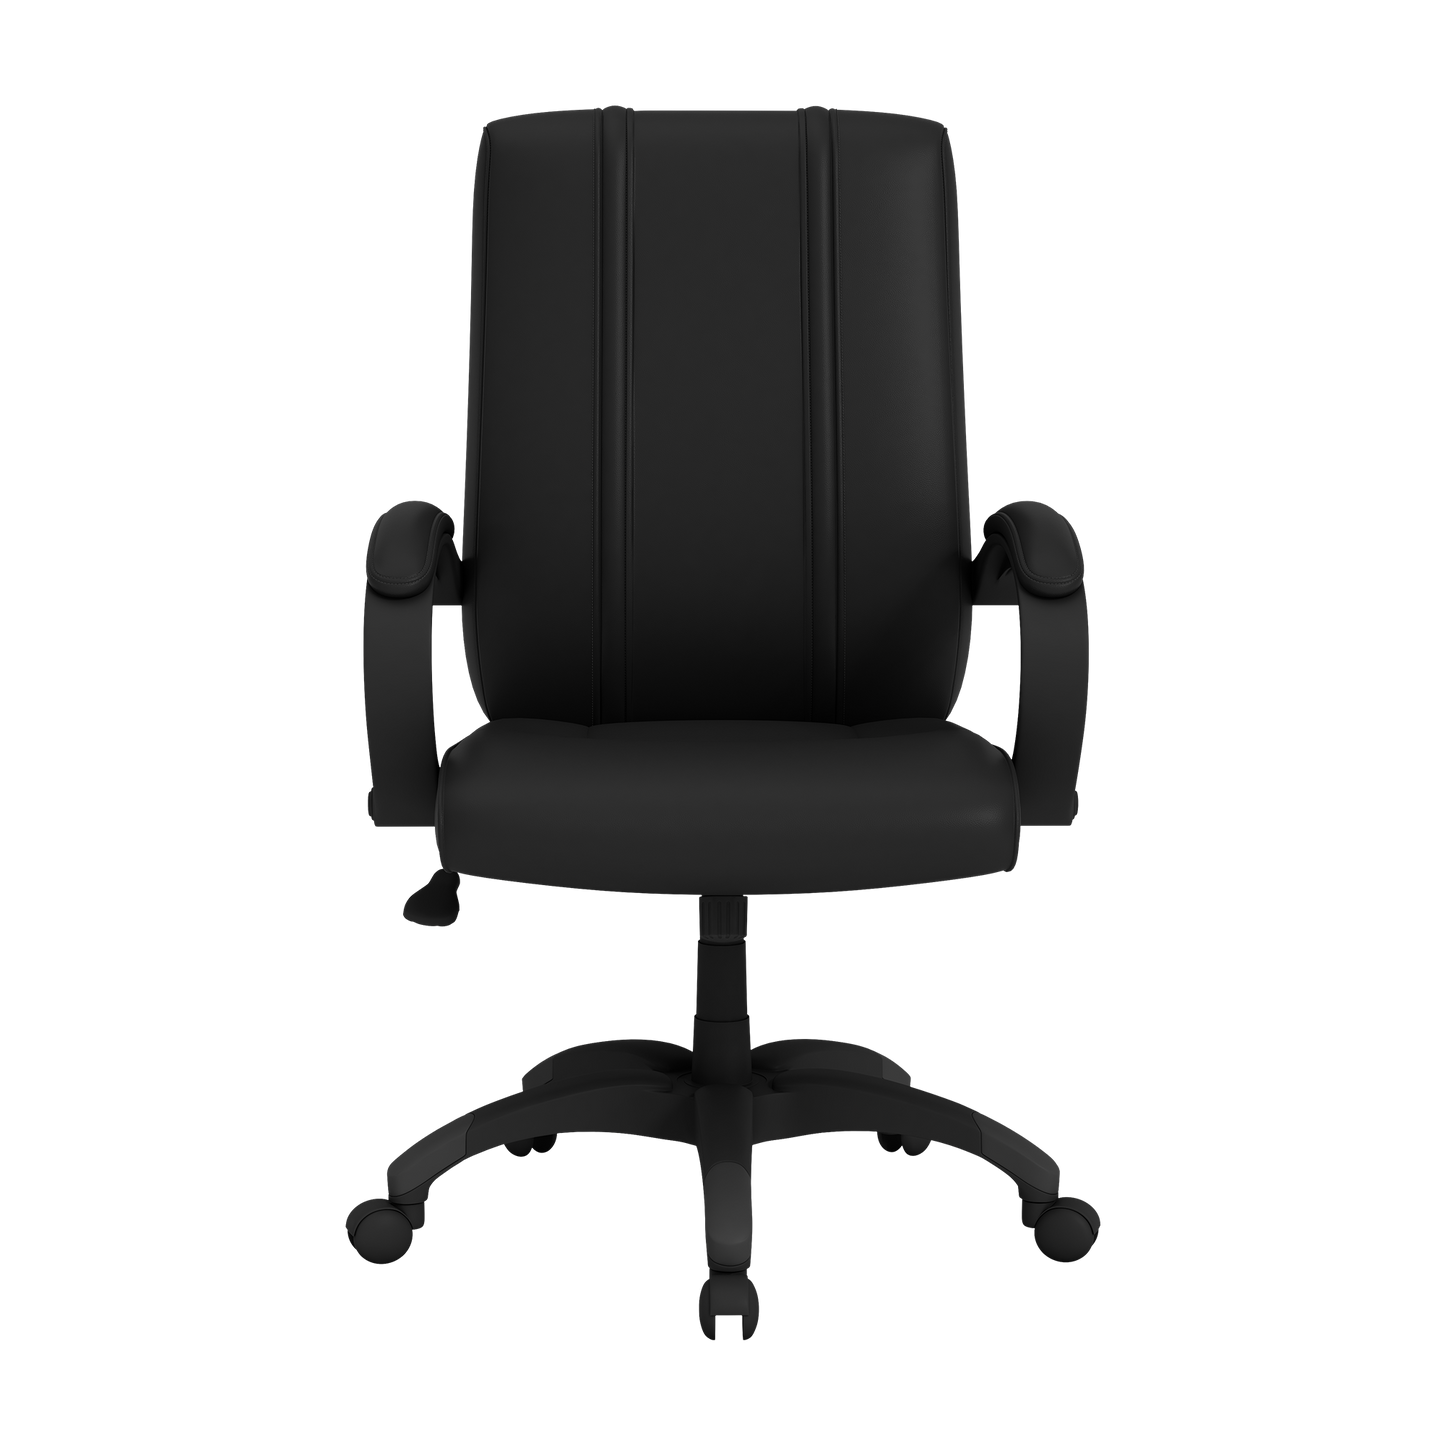 Office Chair 1000 with Vancouver Canucks Logo